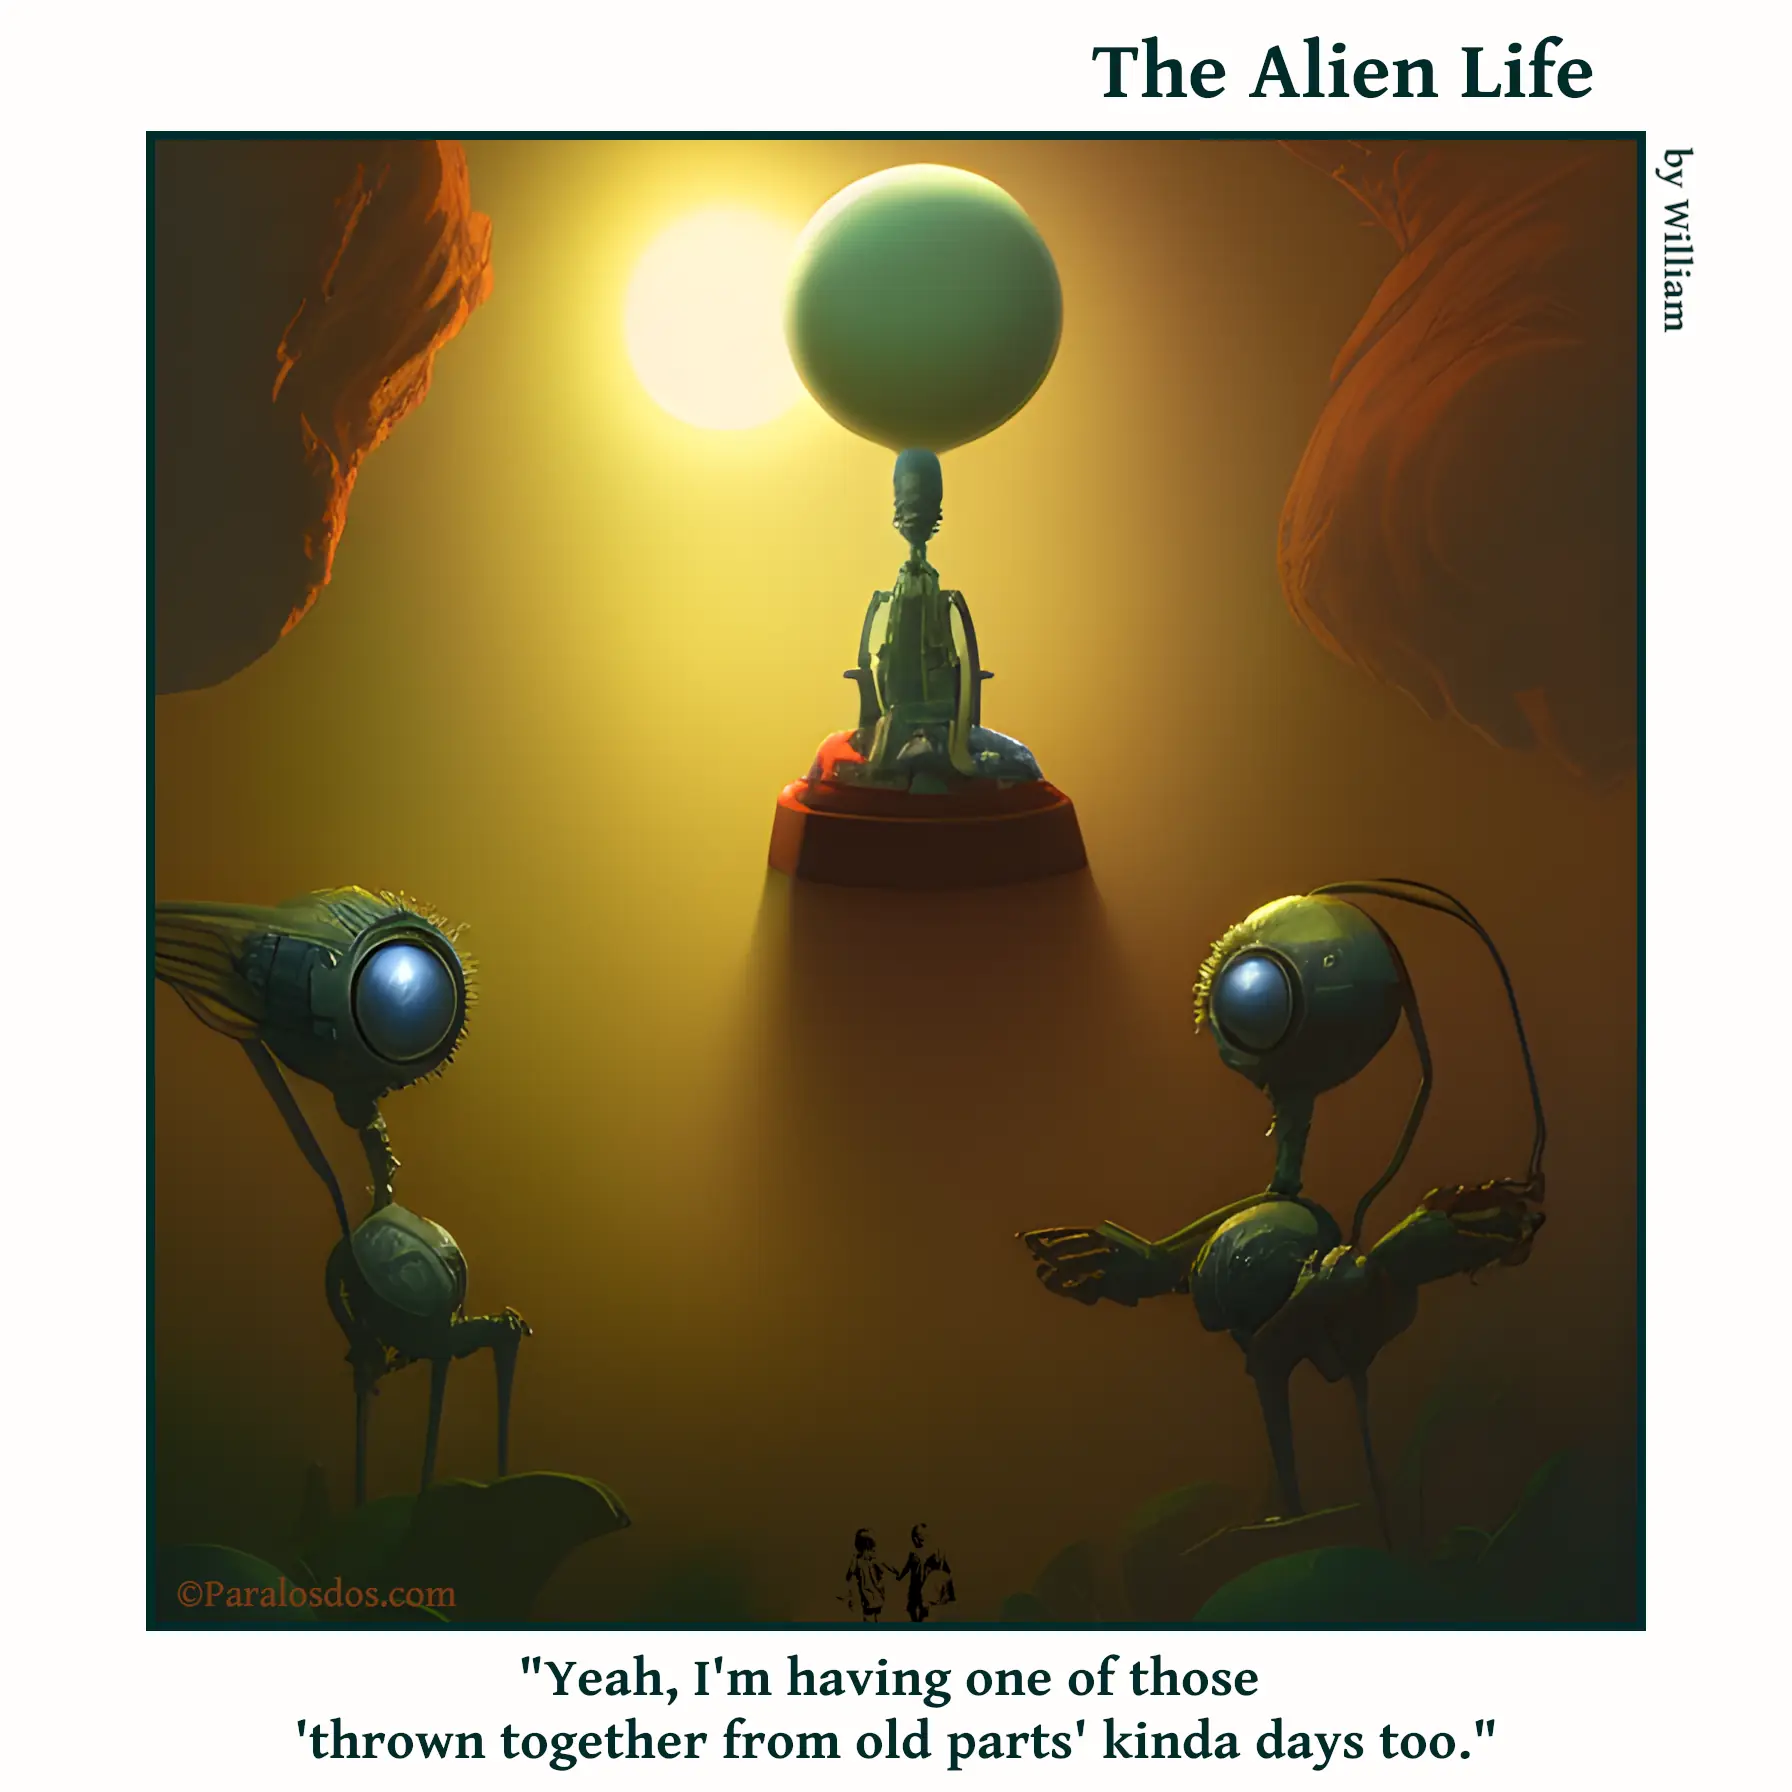 The Alien Life, one panel Comic. Two metal aliens are hanging out. They look like they have seen better days. The caption reads: "Yeah, I'm having one of those 'thrown together from old parts' kinda days too."